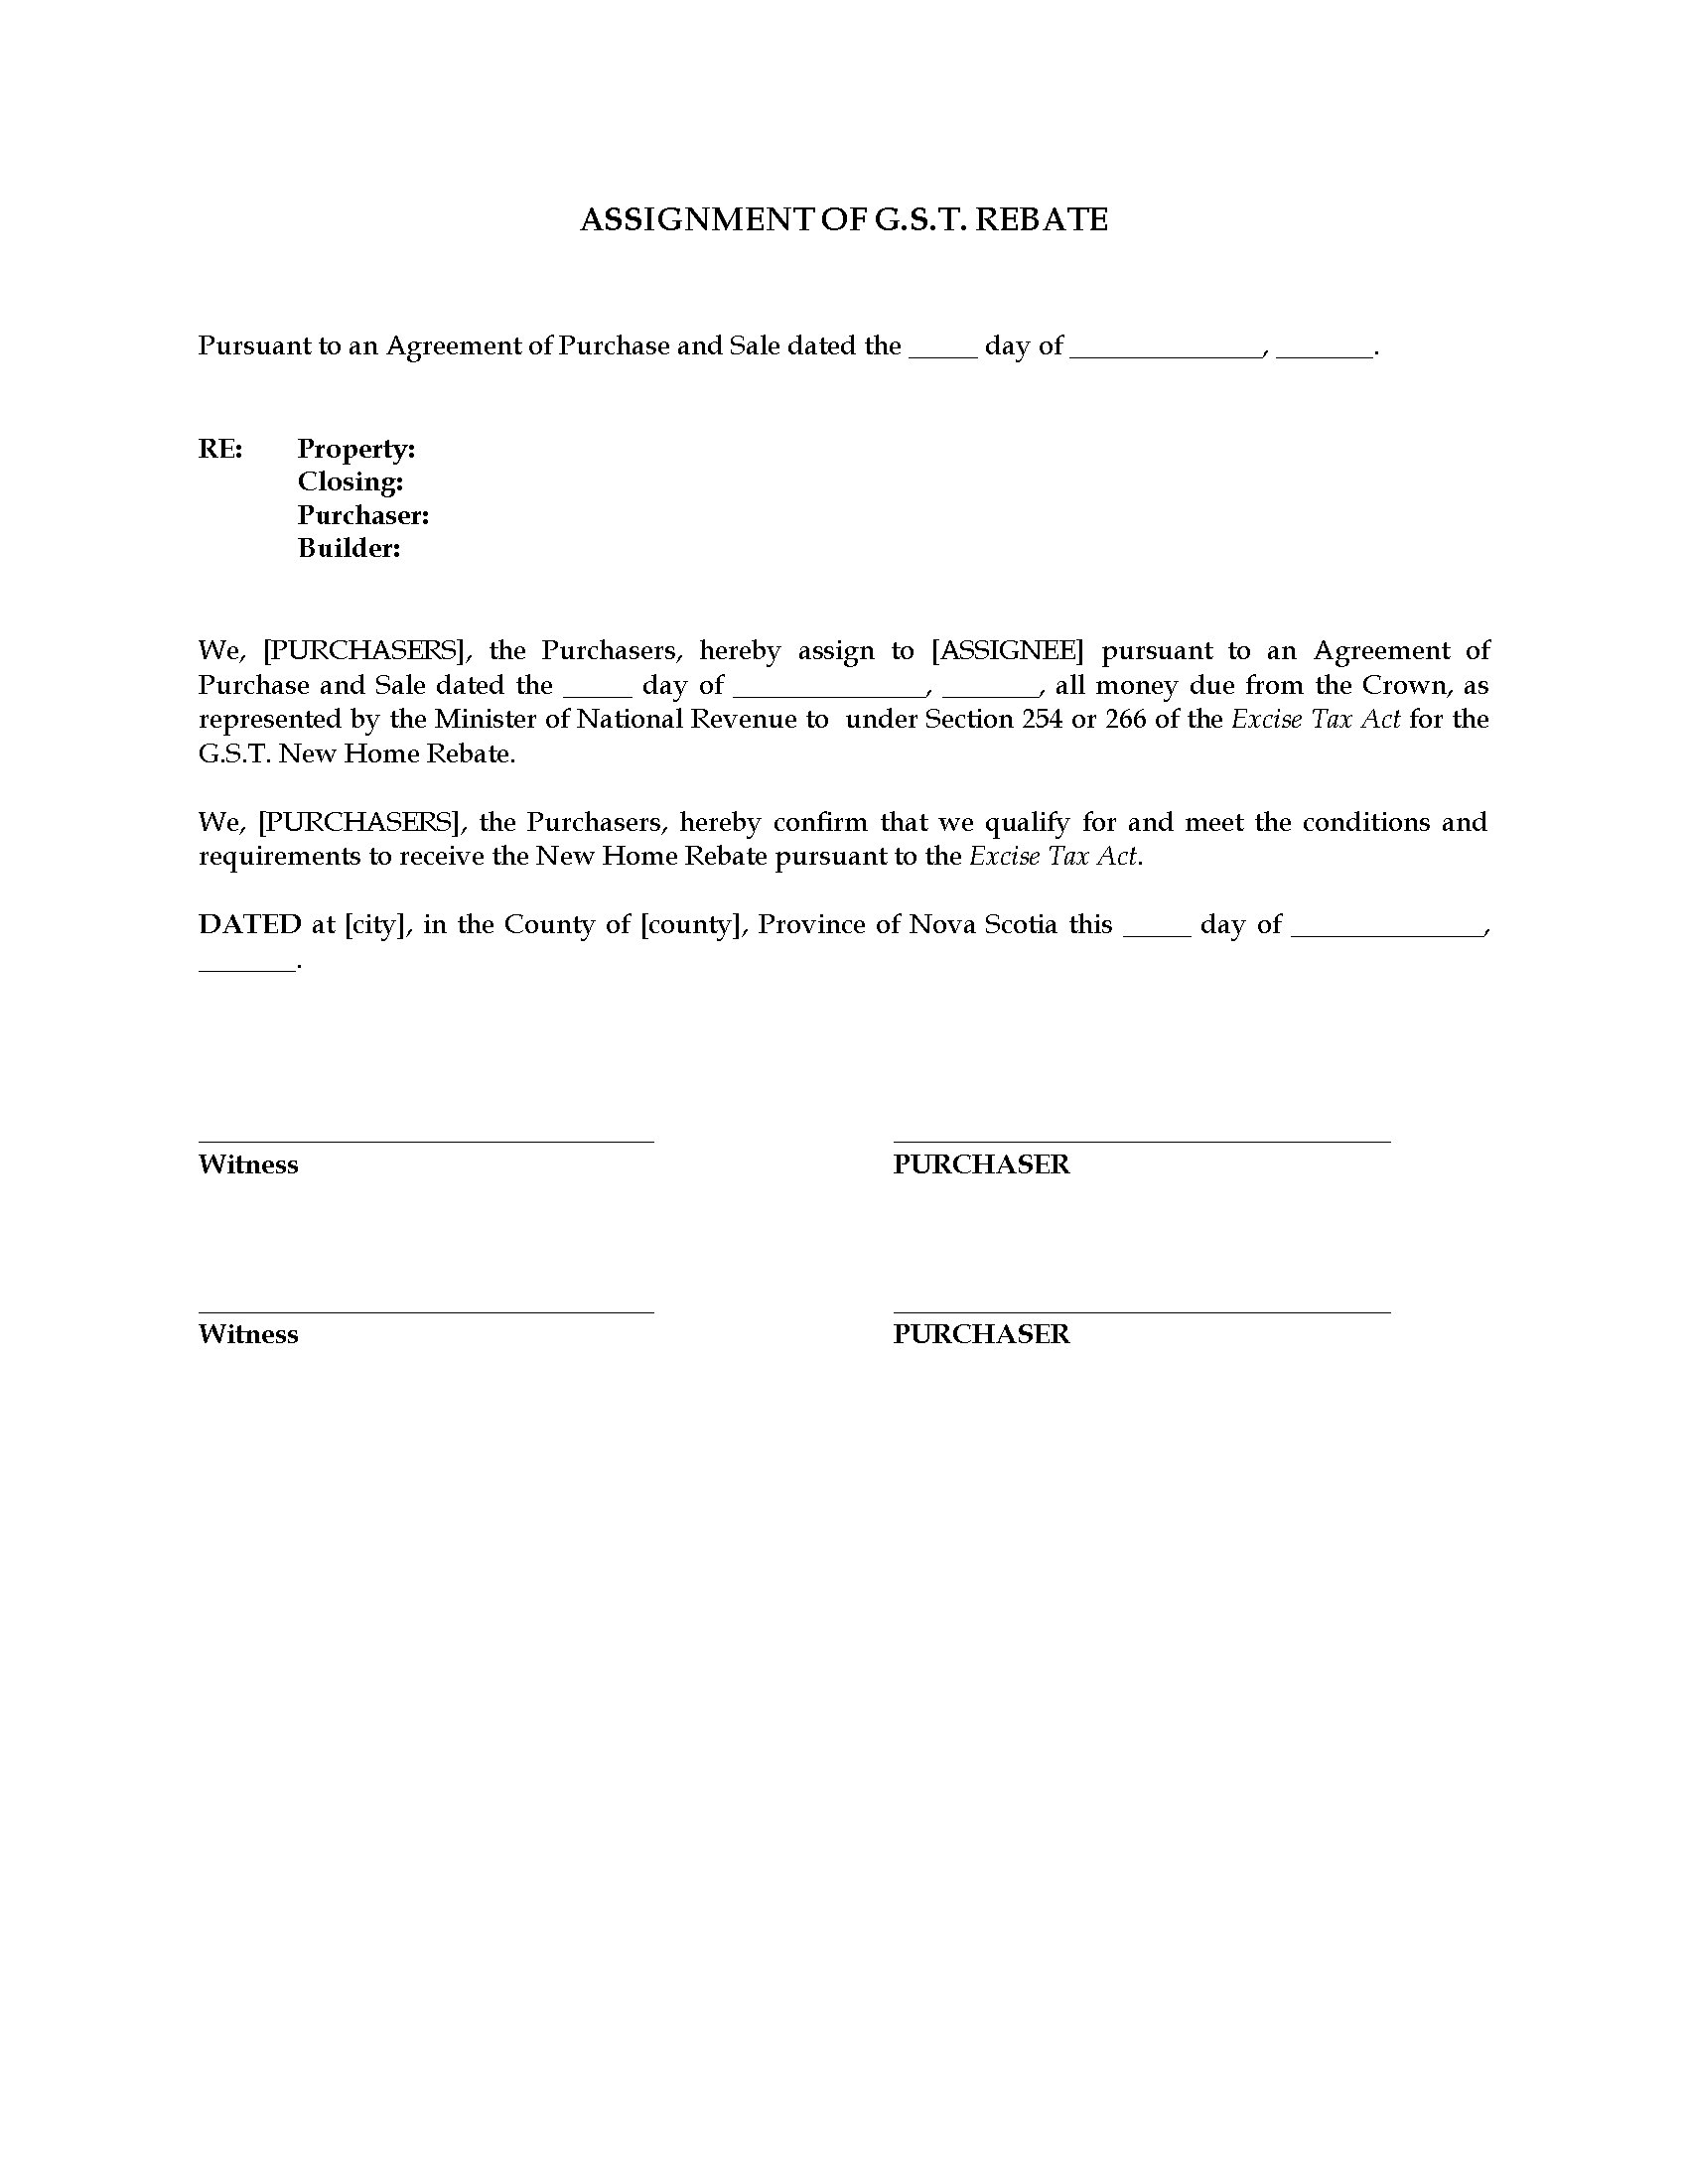 Canada Assignment of GST New Home Rebate | Legal Forms and Business Templates ...1700 x 2200